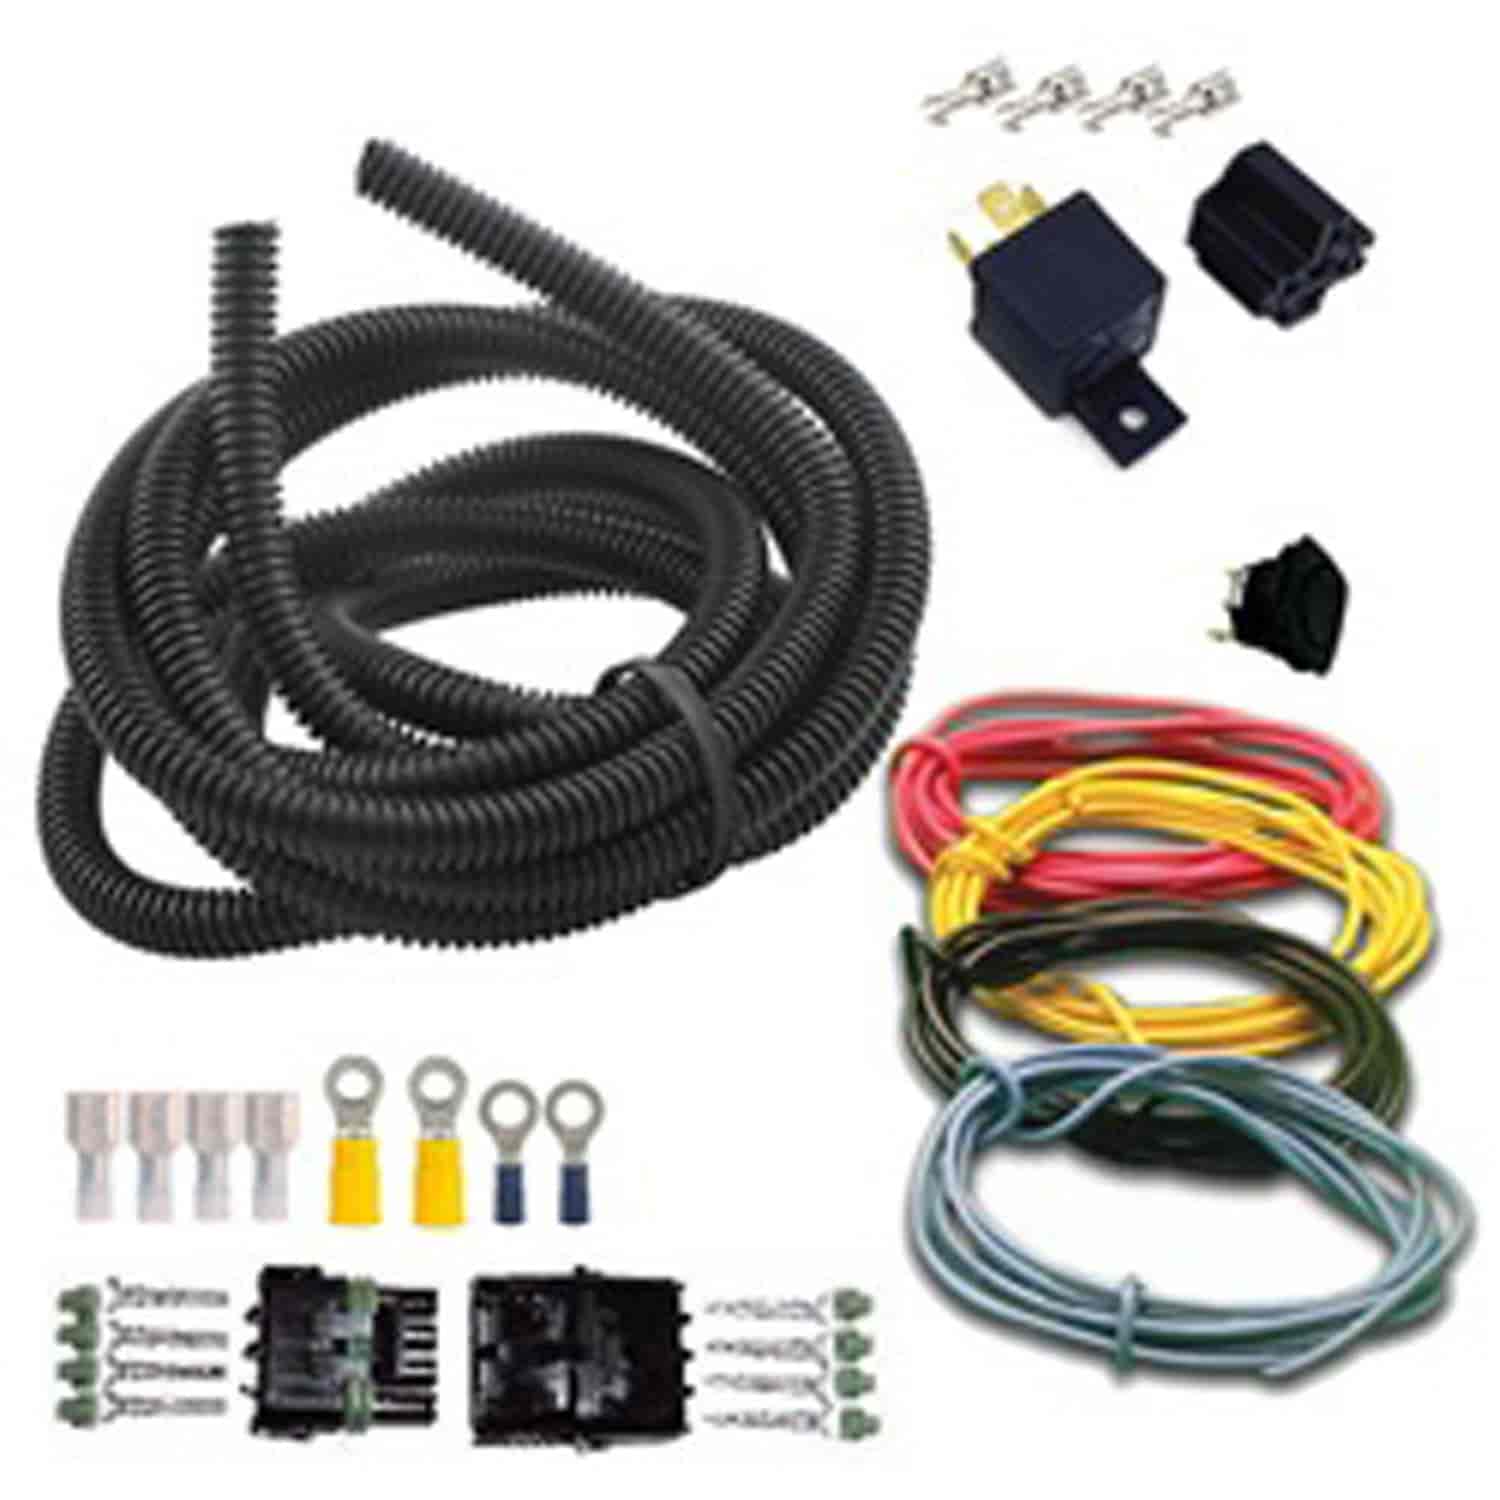 PRO WIRING KIT INCL WEATHER PACK CONNECTORS LOOM WIRE ENDS TO WIRE 2 SOLENOID SYSTEM